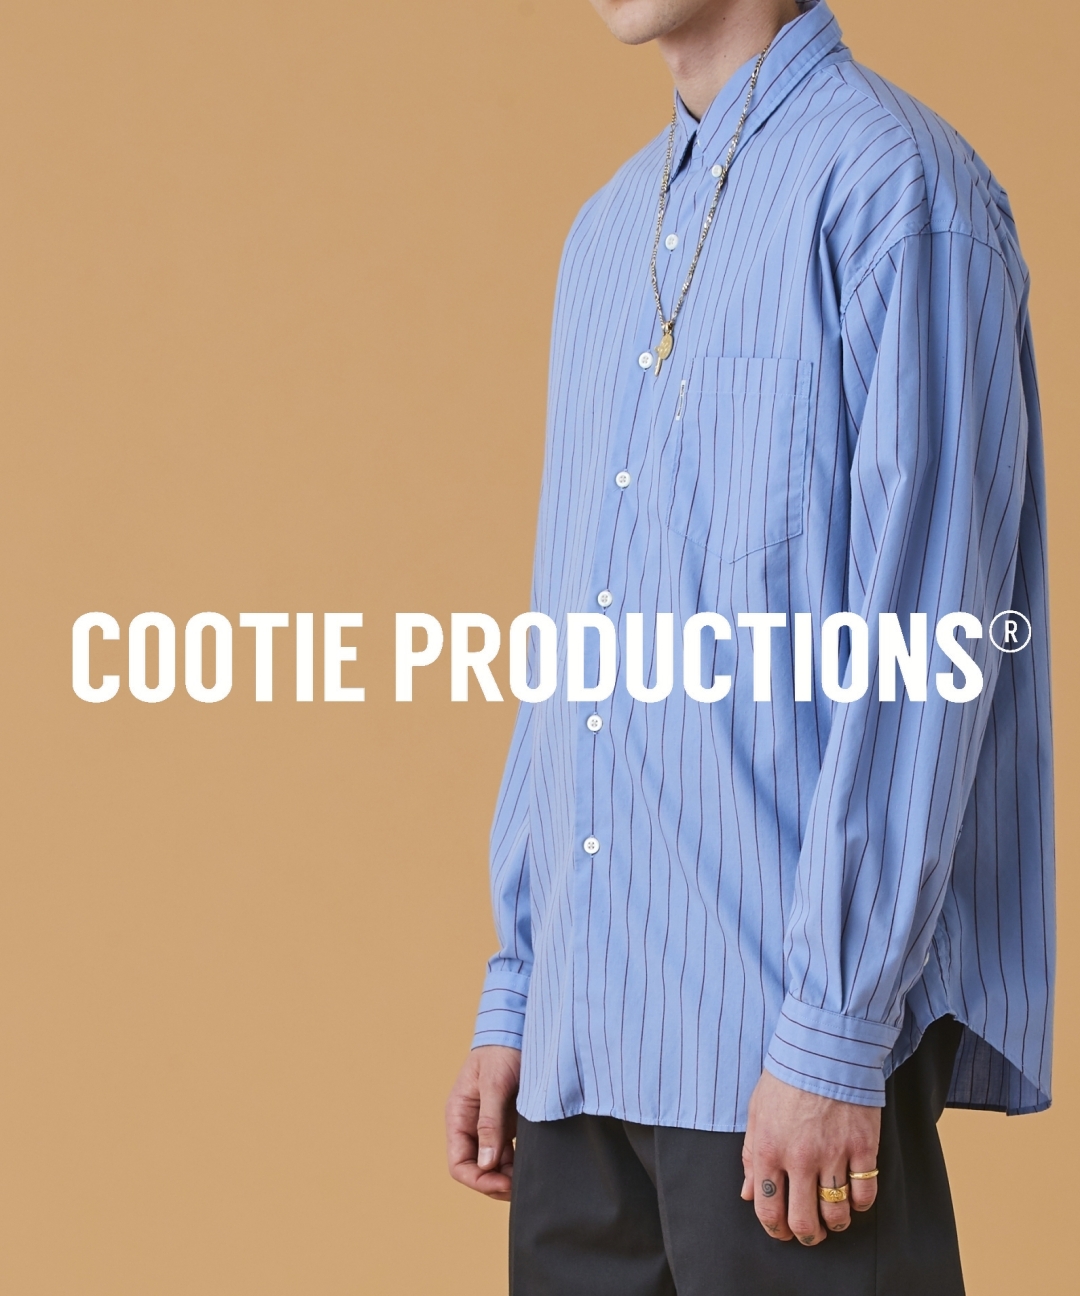 COOTIE/クーティー】3/24 12:00発売開始アイテムのご案内！|TRUMPS 